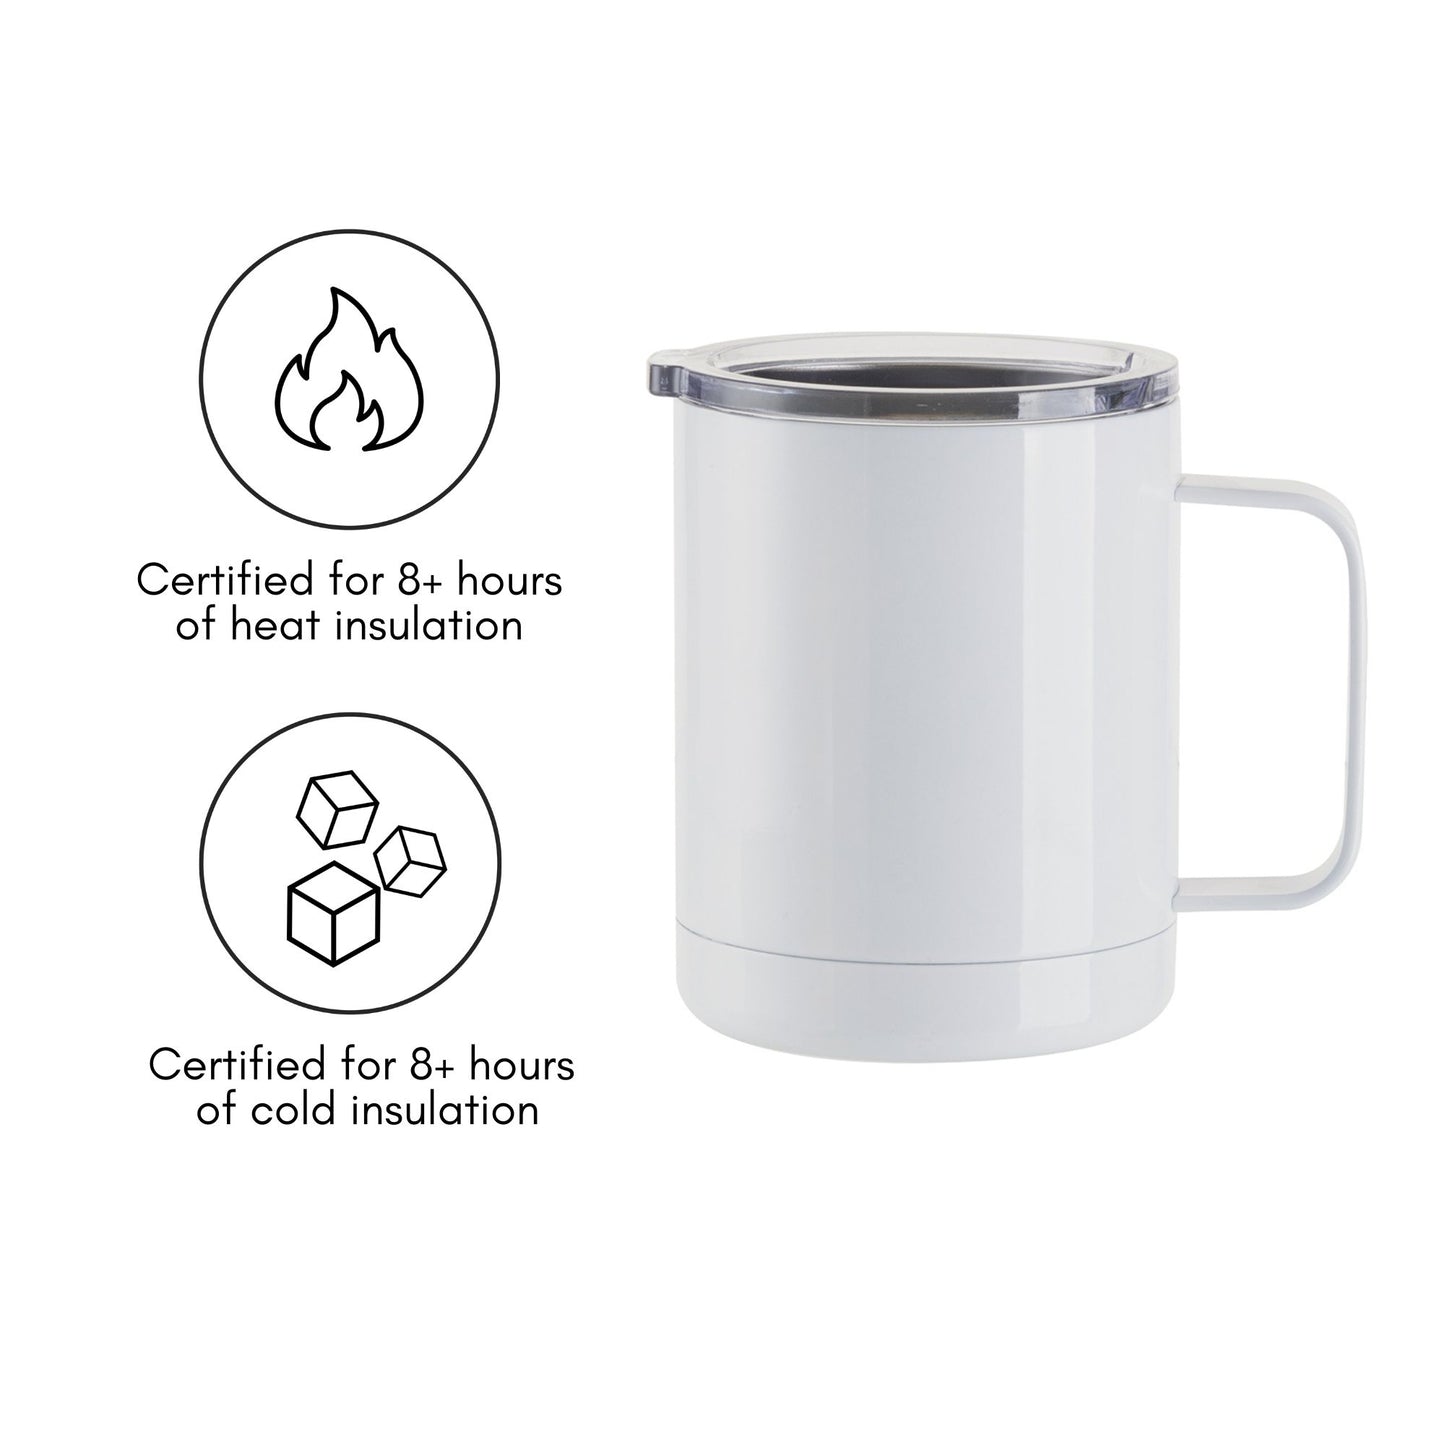 10oz White Stainless Coffee Cup